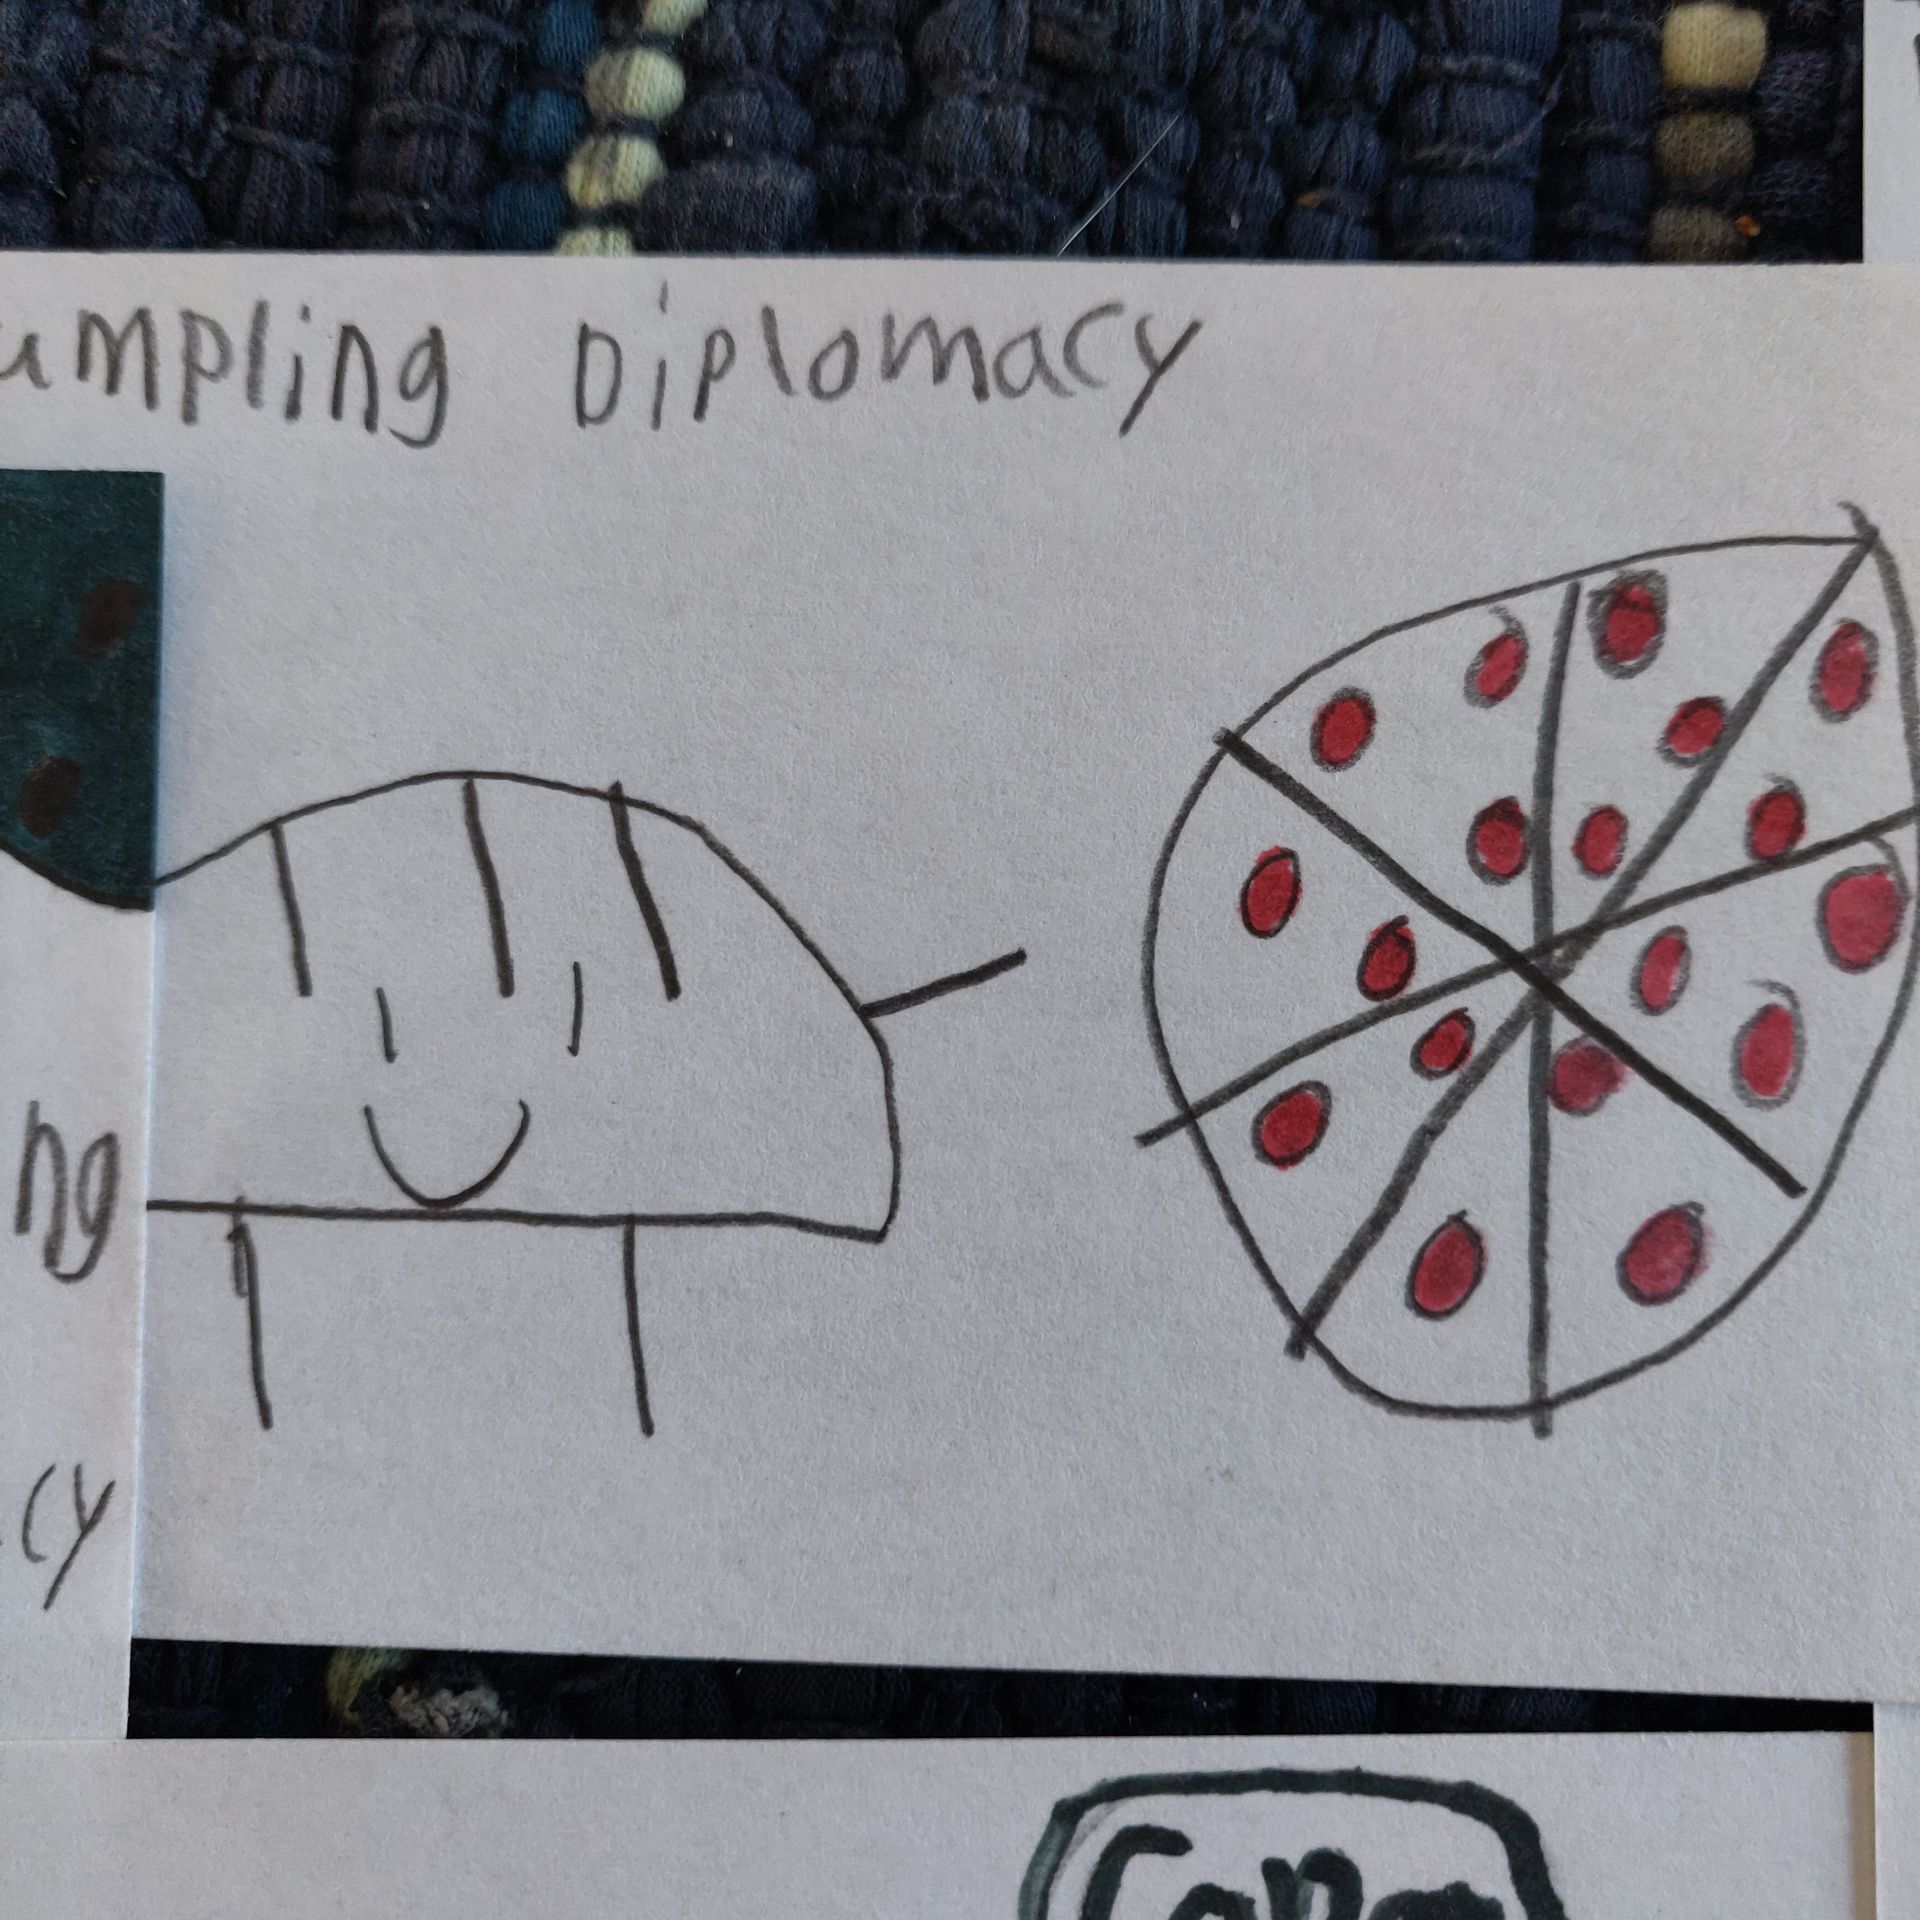 A child 's drawing of a dumpling and a pizza with the word diplomacy at the top